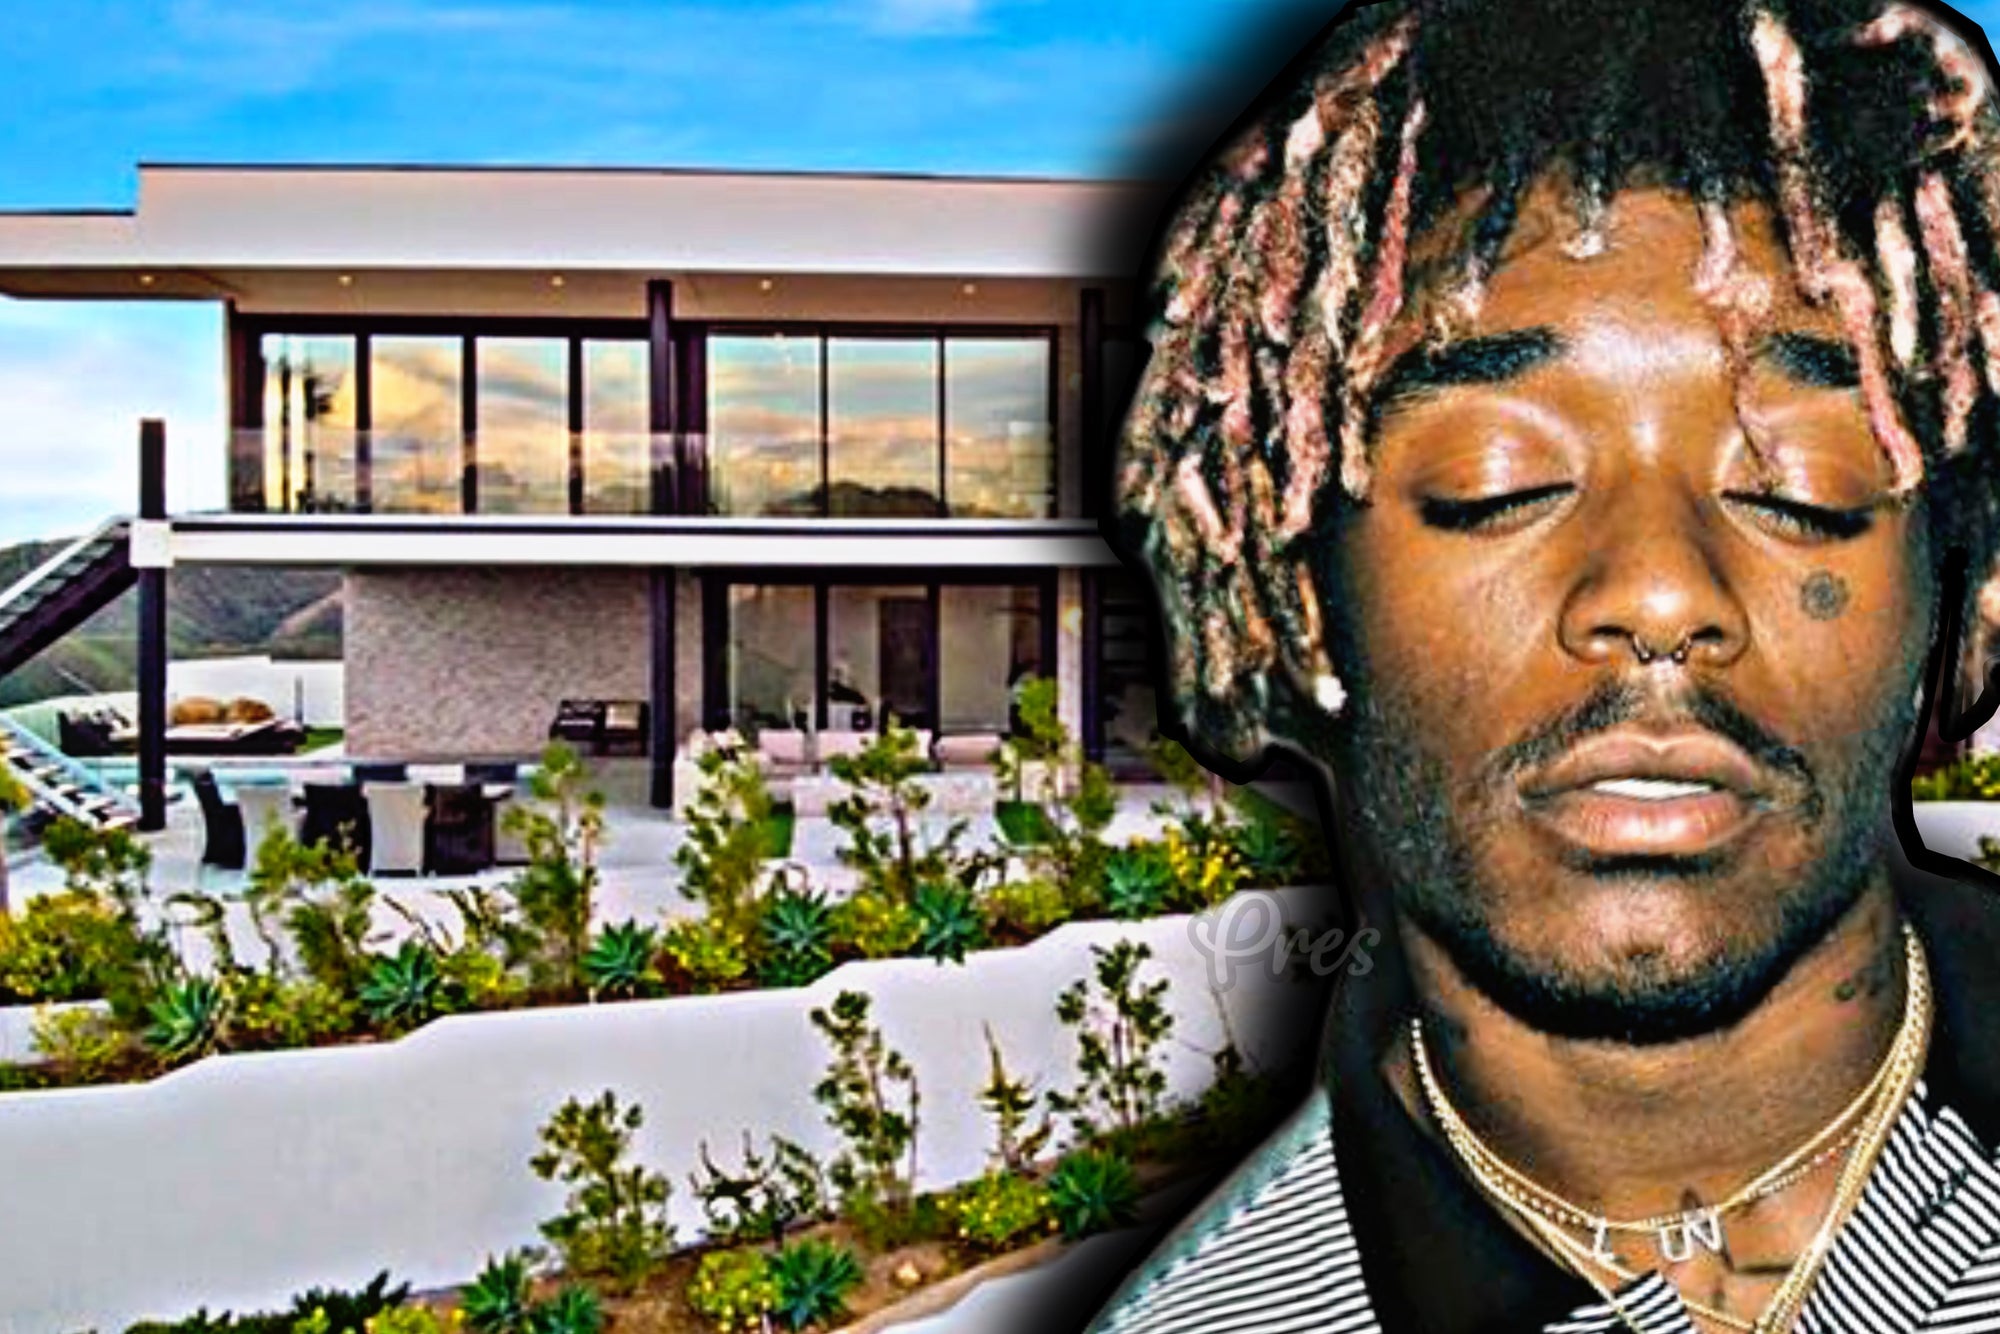 Lil Uzi Vert's $4.35 Million Mansion Finally Sold After Being Listed Last Year